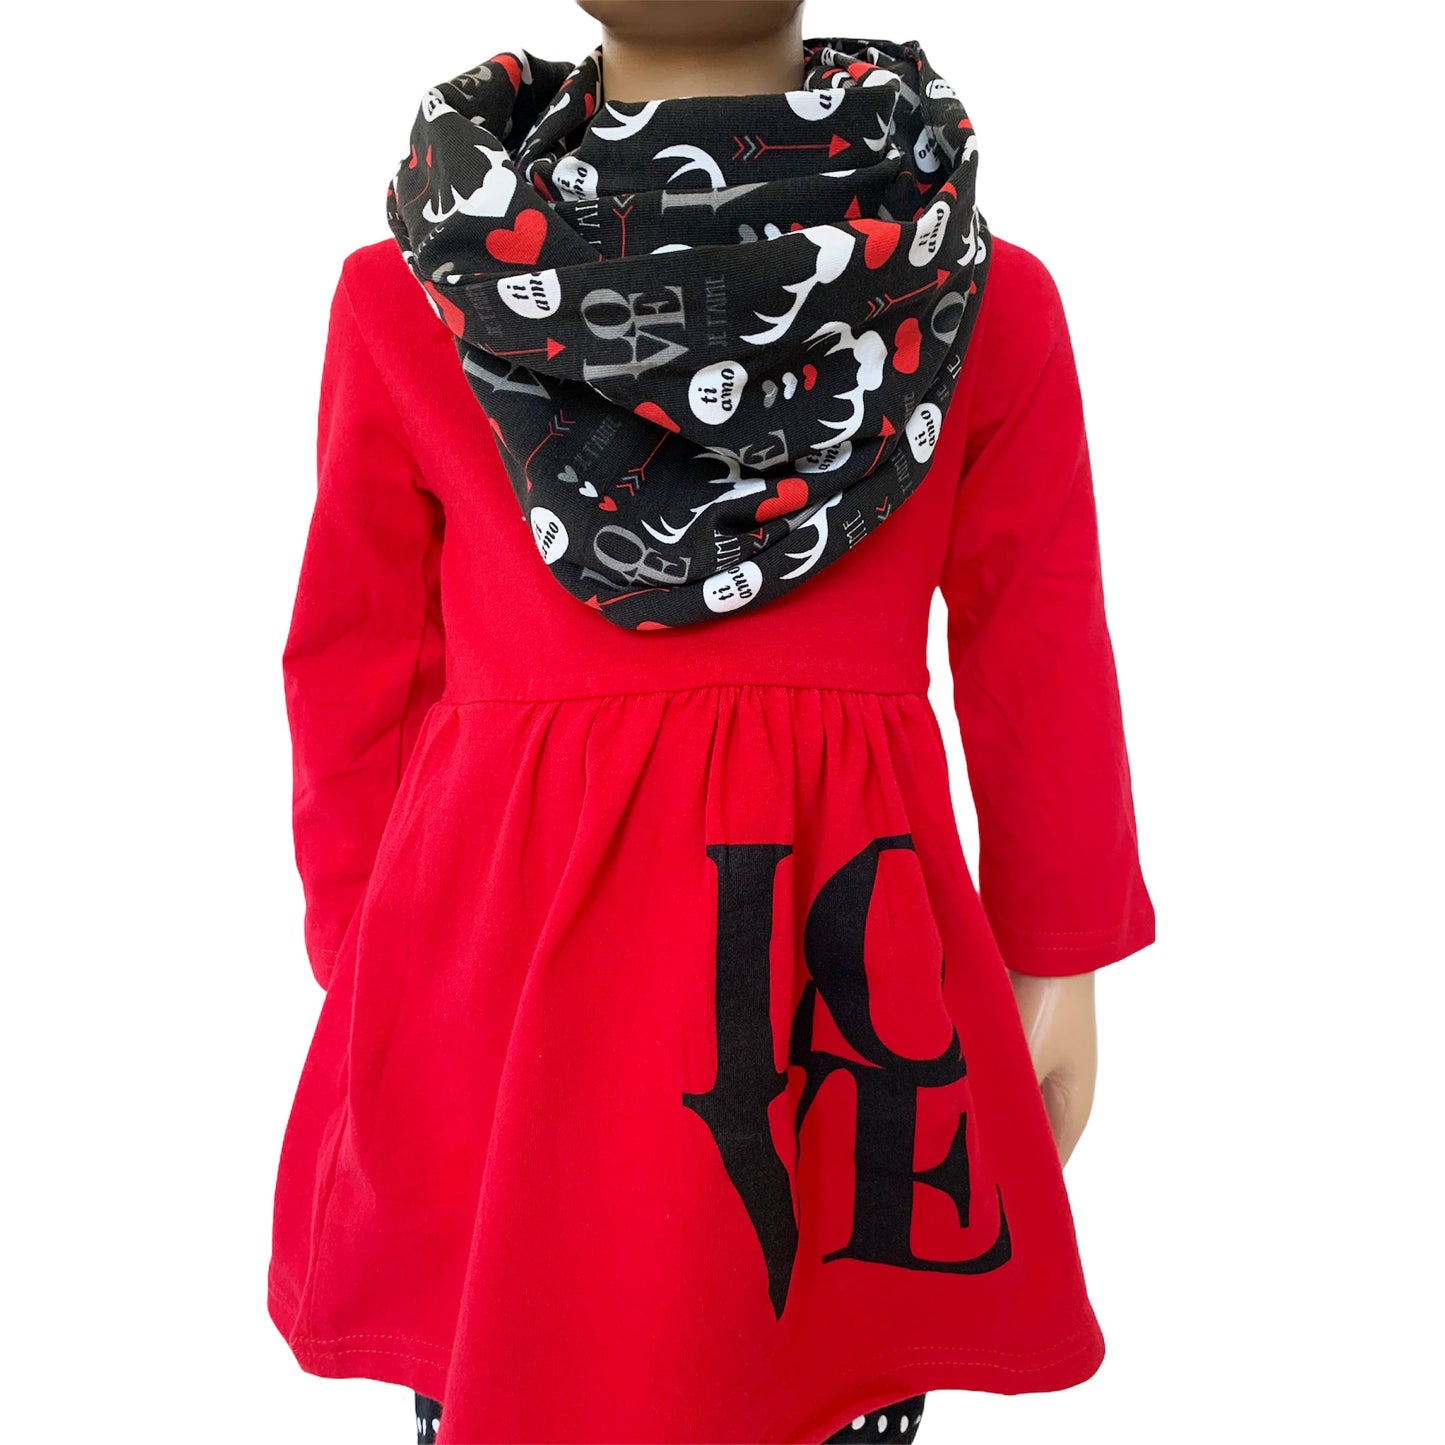 AL Limited Girls Valentine's Day LOVE Red Long Sleeve Tunic Leggings & Scarf Clothing Set